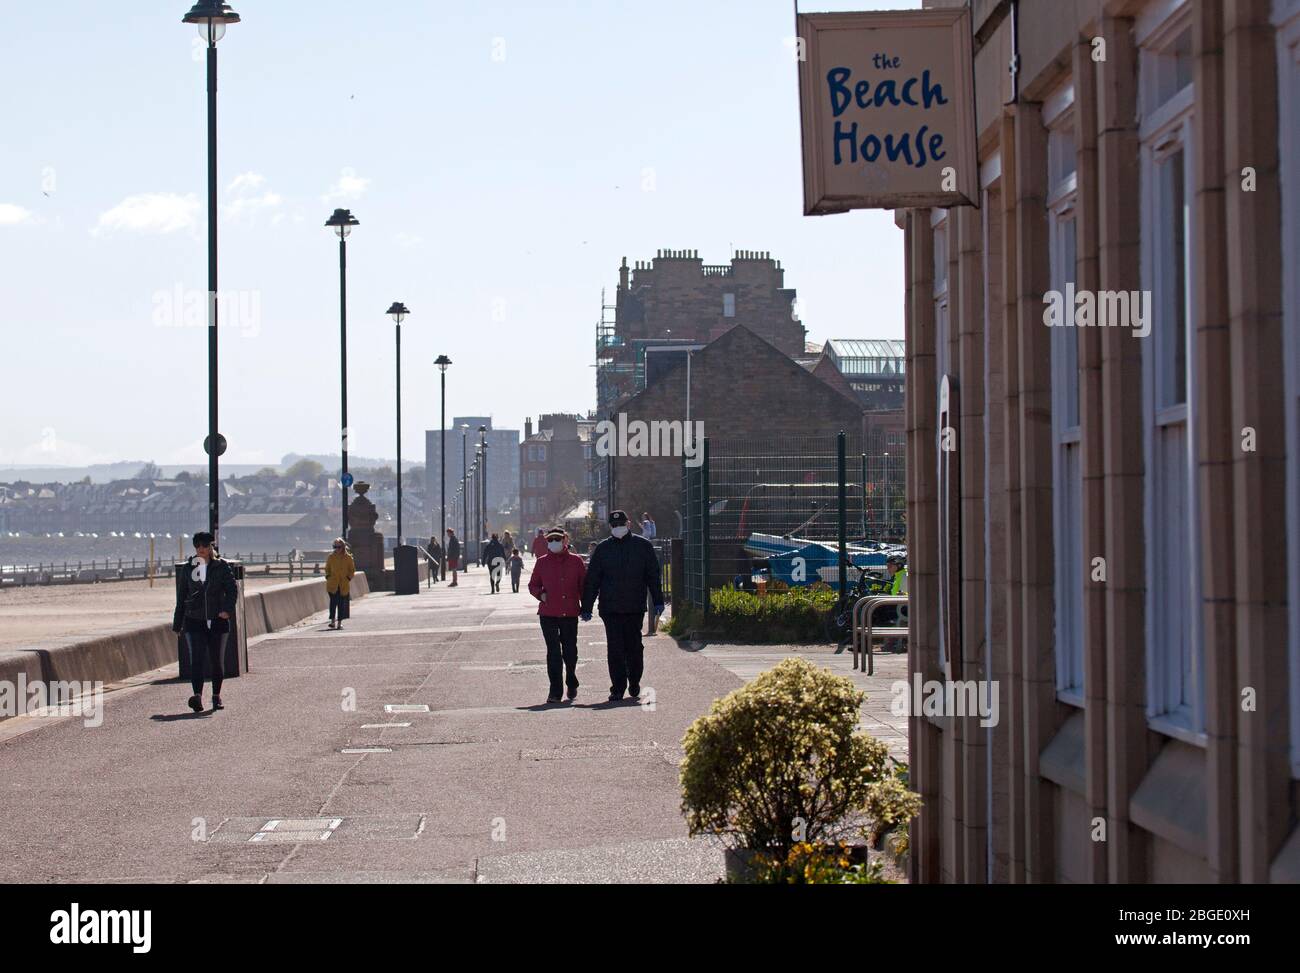 Portobello, Edinburgh, Scotland, UK. 21st April 2020. As Coronavirus Lockdown continues the public who are out before noon enjoy the sunshine at the seaside however, pictured one elderly couple wearing face masks for protection. A cool ENE wind of 30km/h with potential gusts of 46 km/h does not encourage those that are out to sit for very long. Three places are now opening for take away food, Muro's Bistro, The  Beach House and the Espy Pub has removed the shutters from their windows. Credit: Arch White/ Alamy Live News. Stock Photo